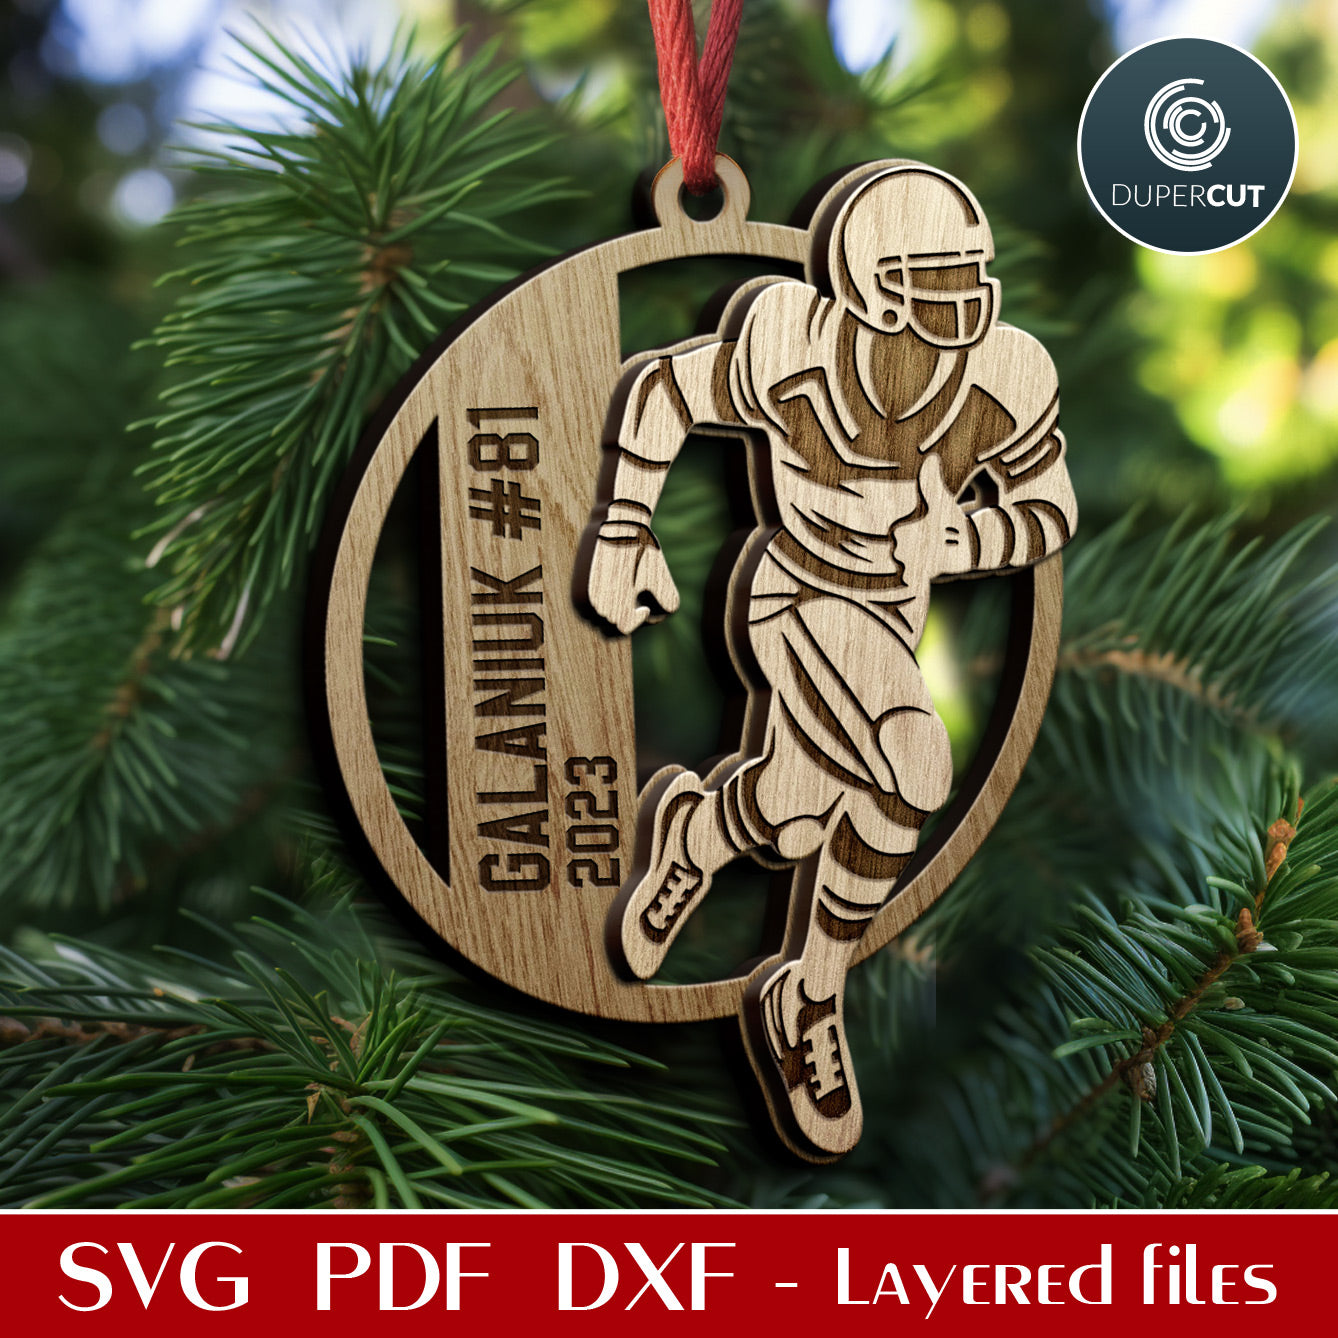 Personalized Football player ornaments layered cut files template, Christmas tree decoration SVG files for Glowforge, Xtool, CNC laser machines, Cricut, by www.DuperCut.com